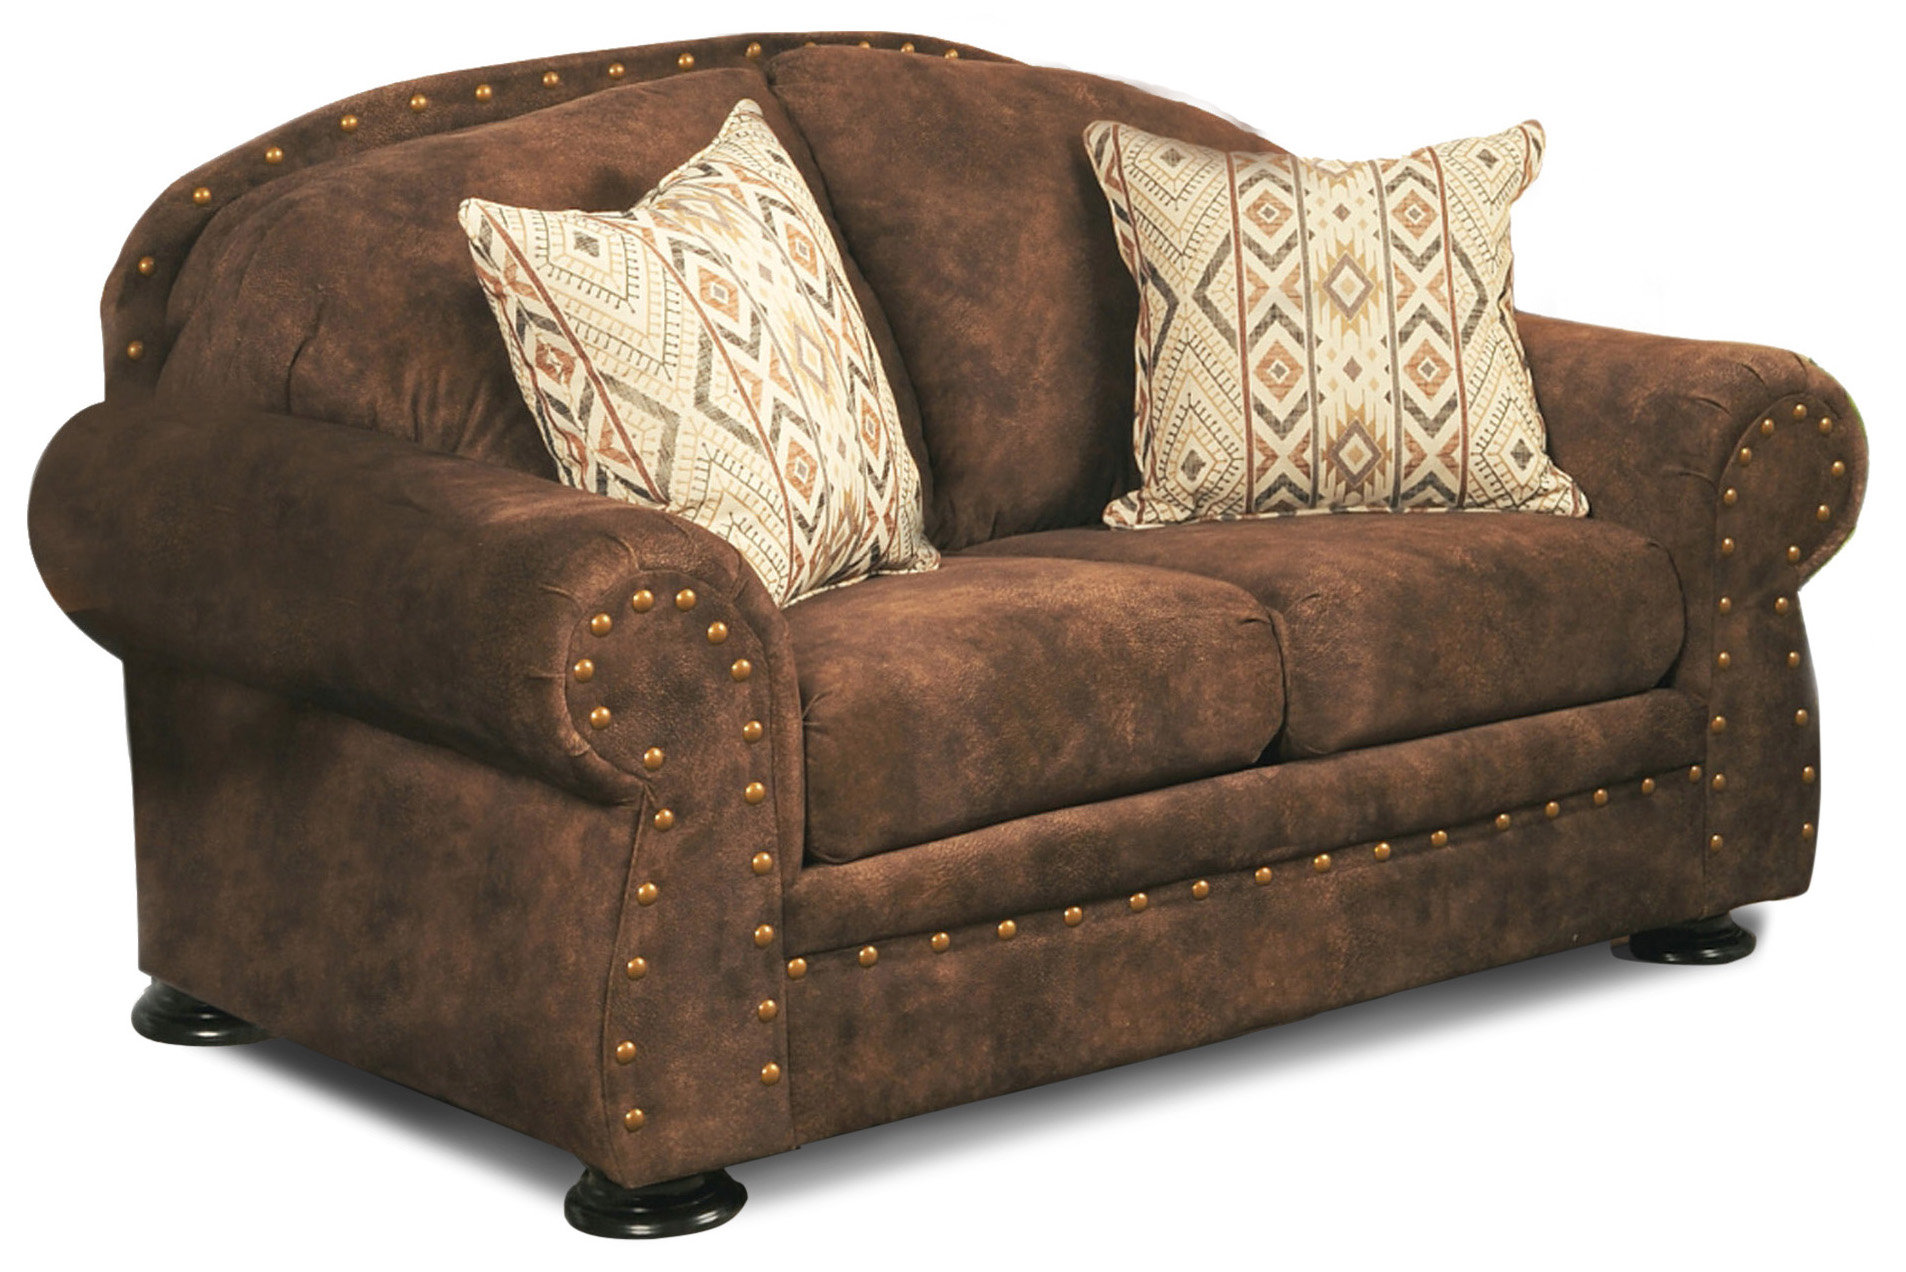 Intermountain Furniture 1054 Wrangler Chestnut Wyoming Leather Look  Loveseat with 2 Pillows | Bozzuto's Furniture and Appliance